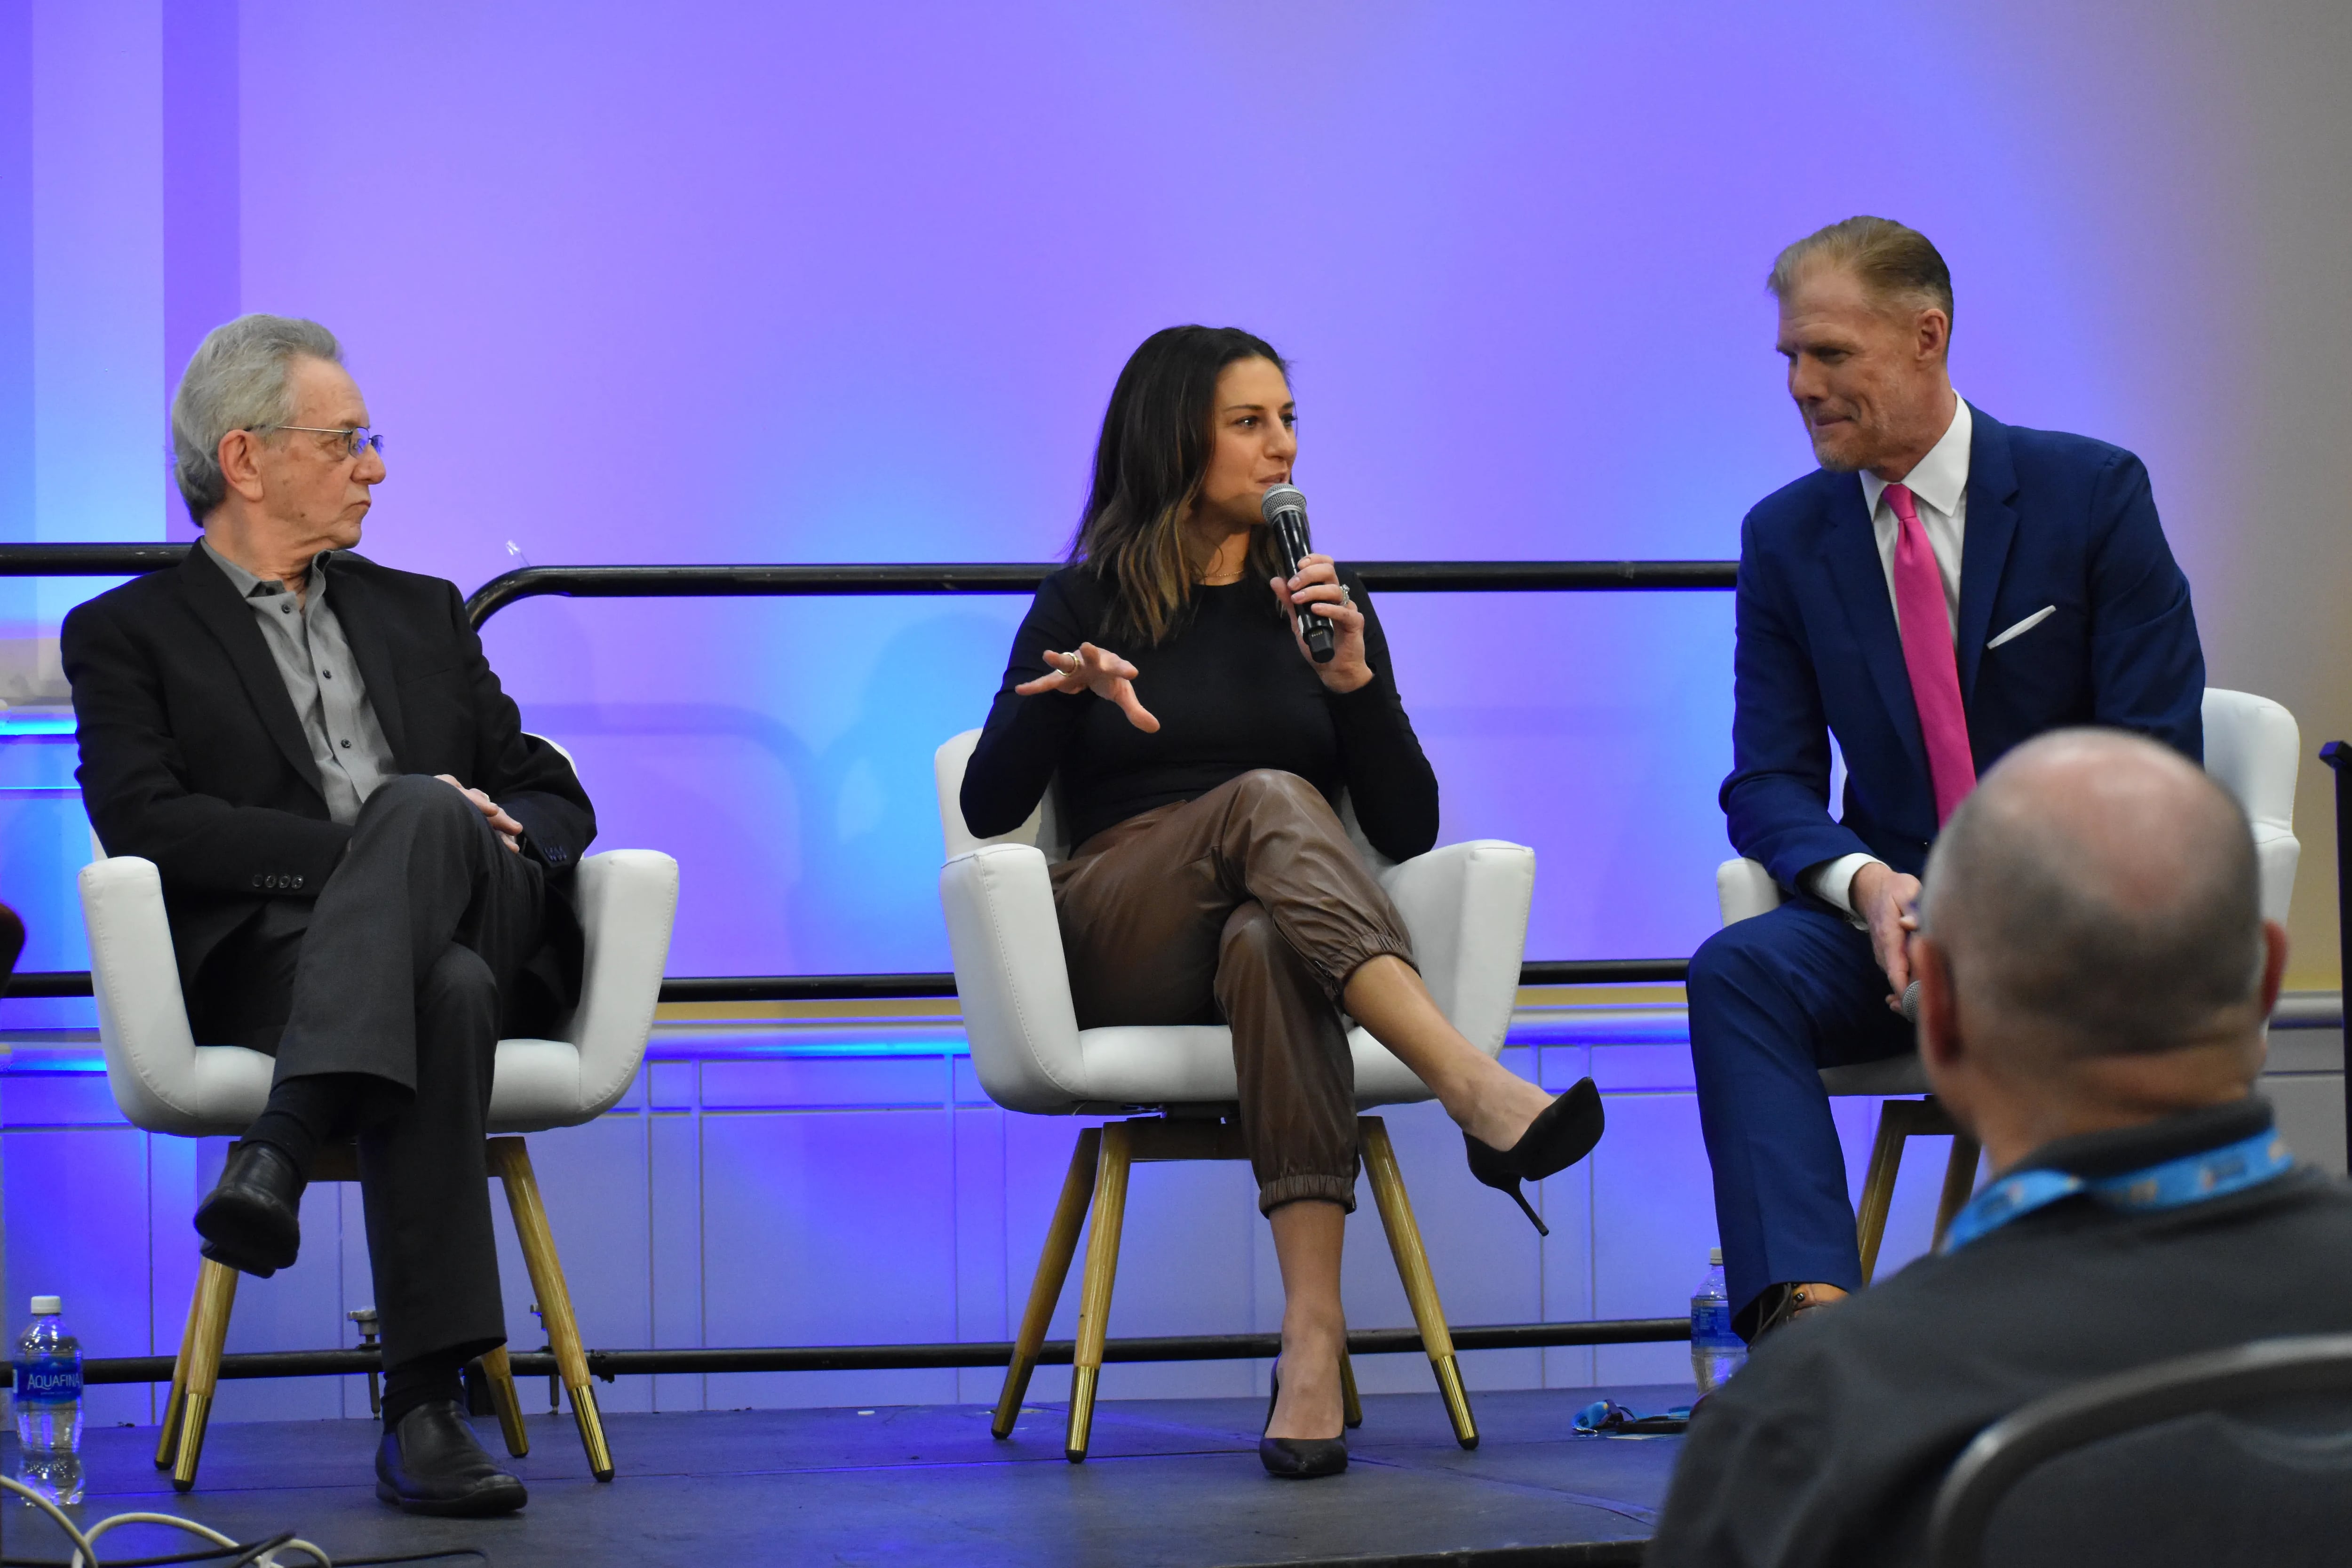 Carli Lloyd (center) and Alexi Lalas (right) will be Fox studio analysts, while JP Dellacamera (left) calls play-by-play of the United States' games.